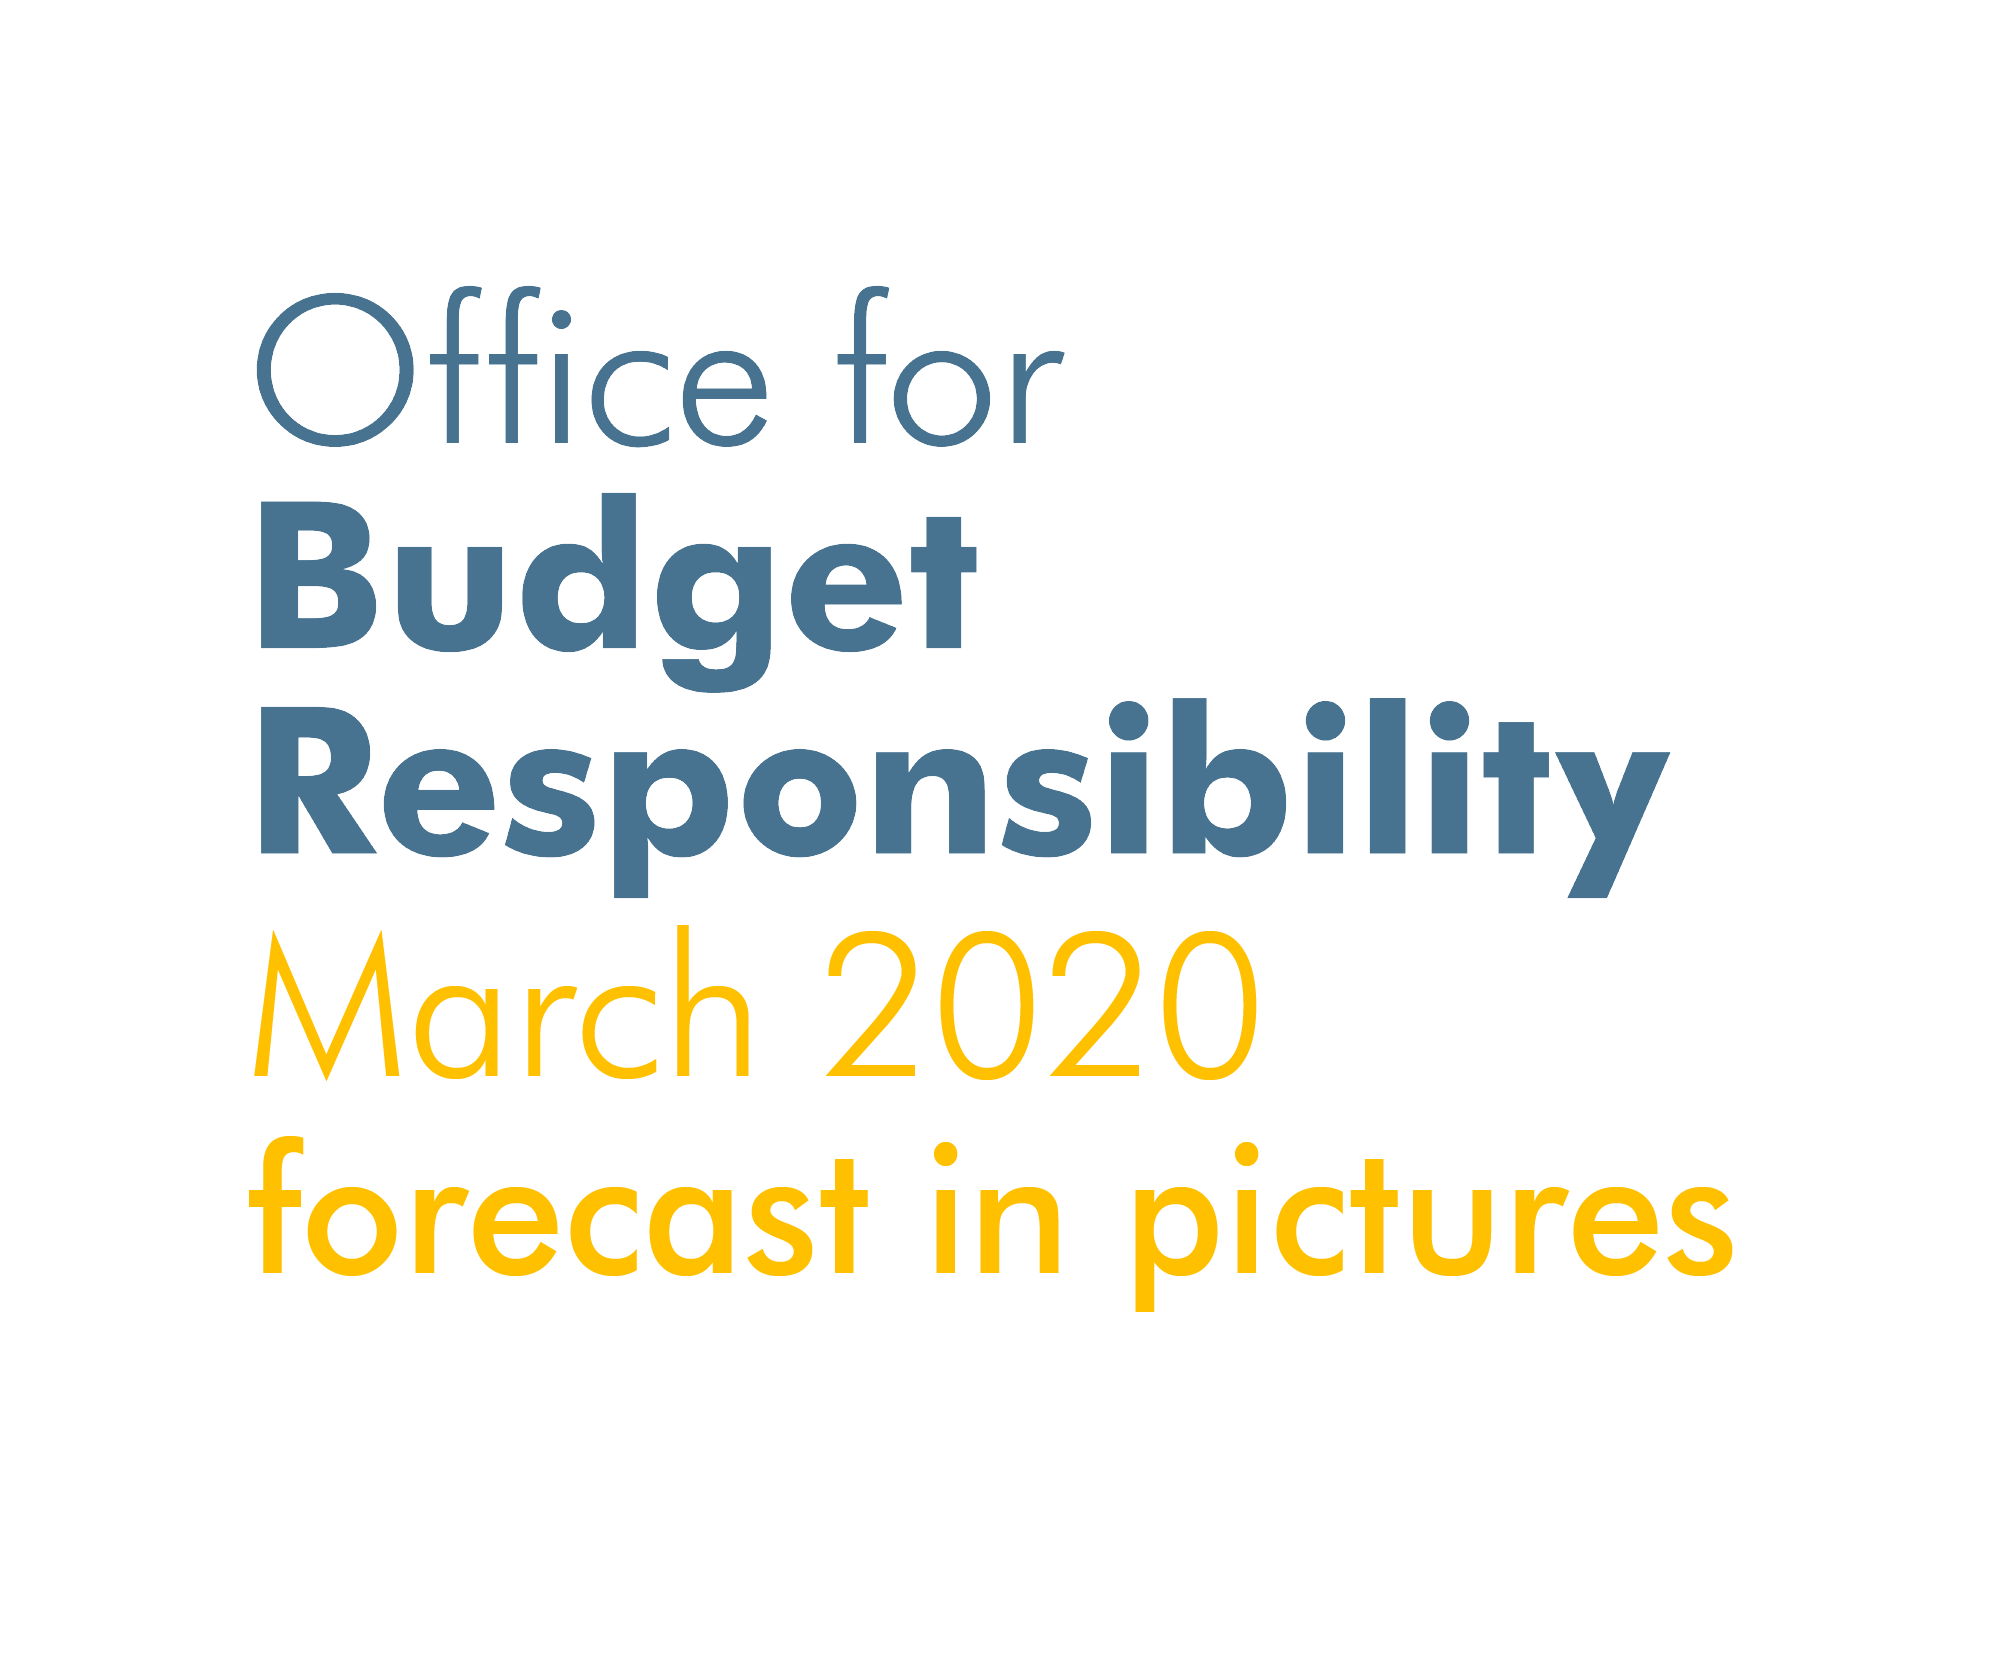 March 2020 forecast in picture graphic